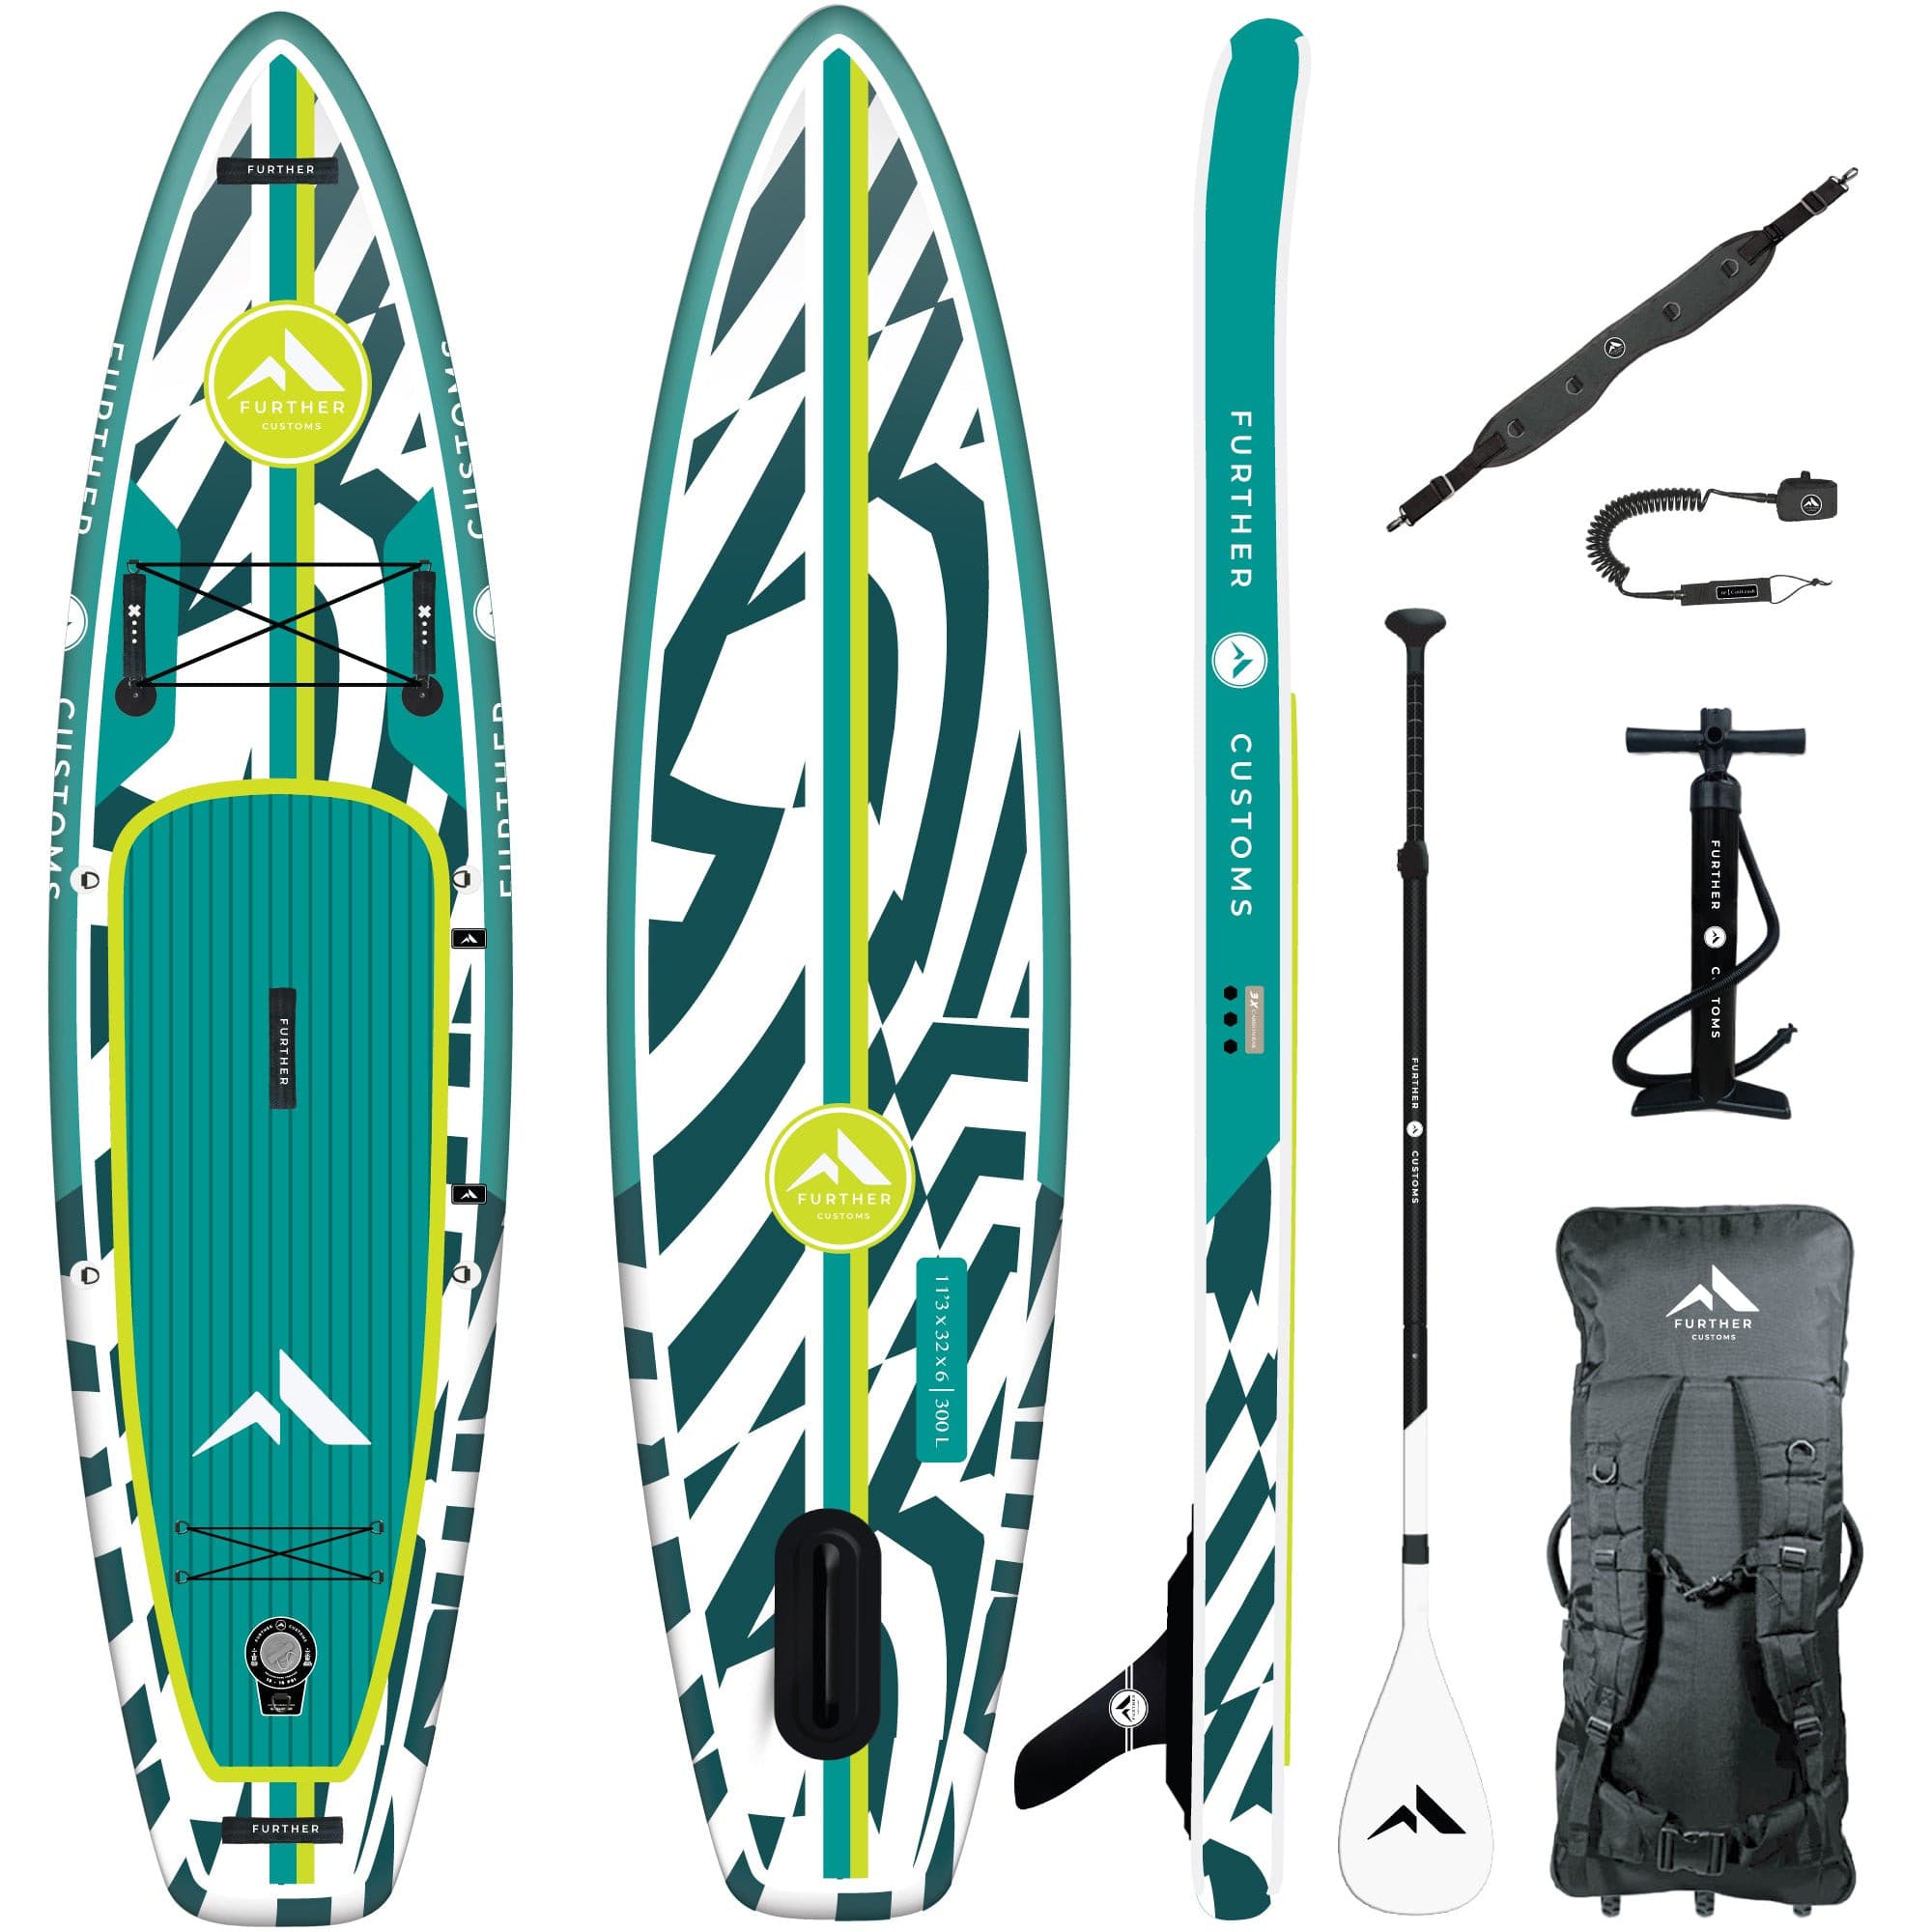 Further Customs - 11'3 Podium Turquoise Inflatable Paddleboard Kit